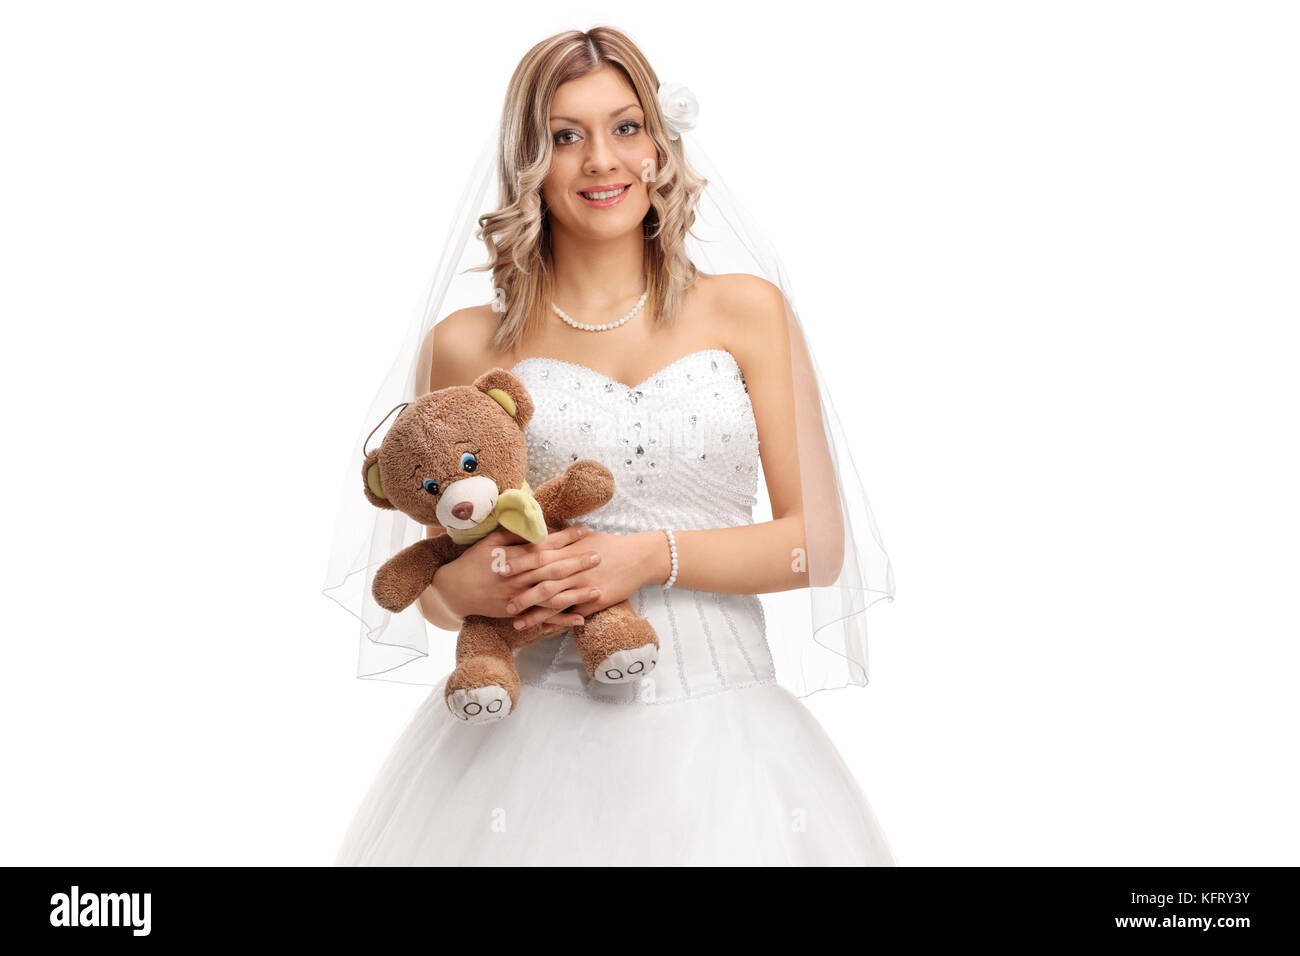 Young bride holding a teddy bear isolé sur fond blanc Banque D'Images